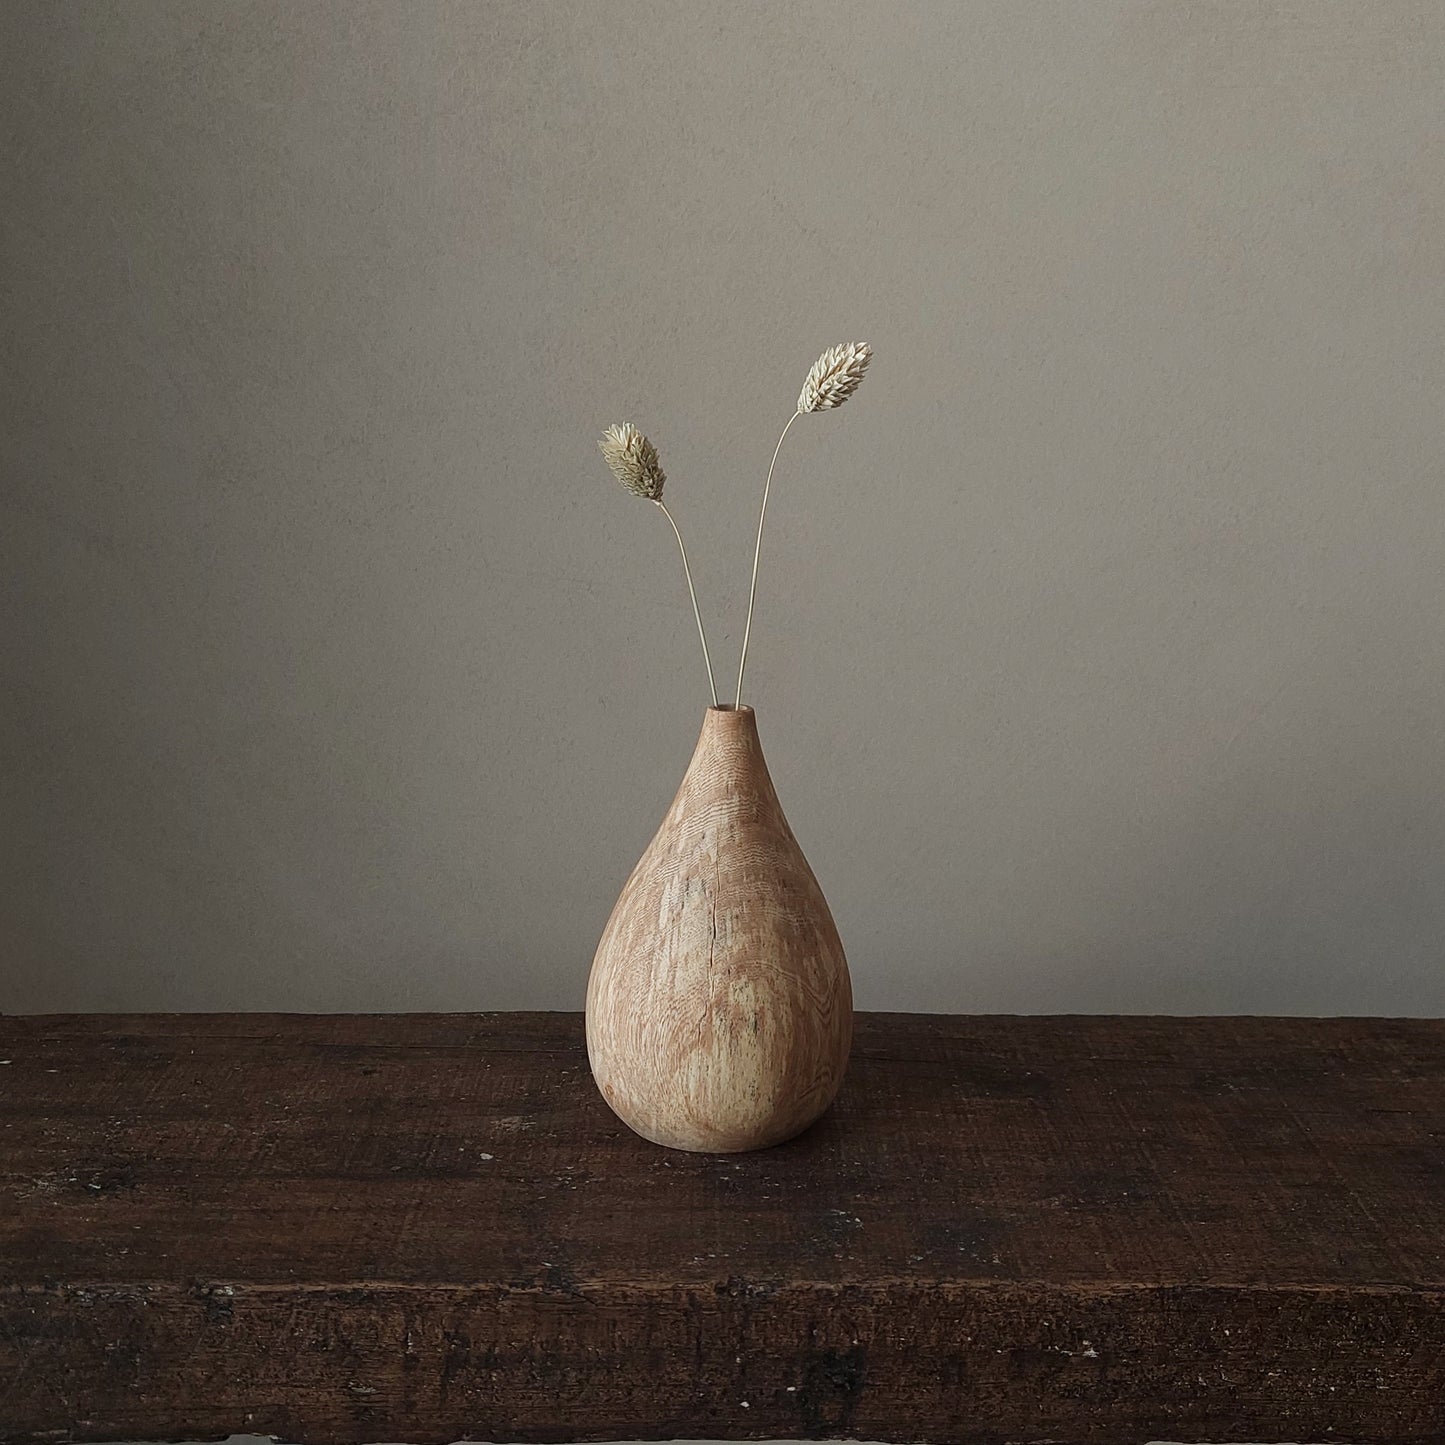 "In nature nothing is created, nothing is lost: everything is transformed" | Vase